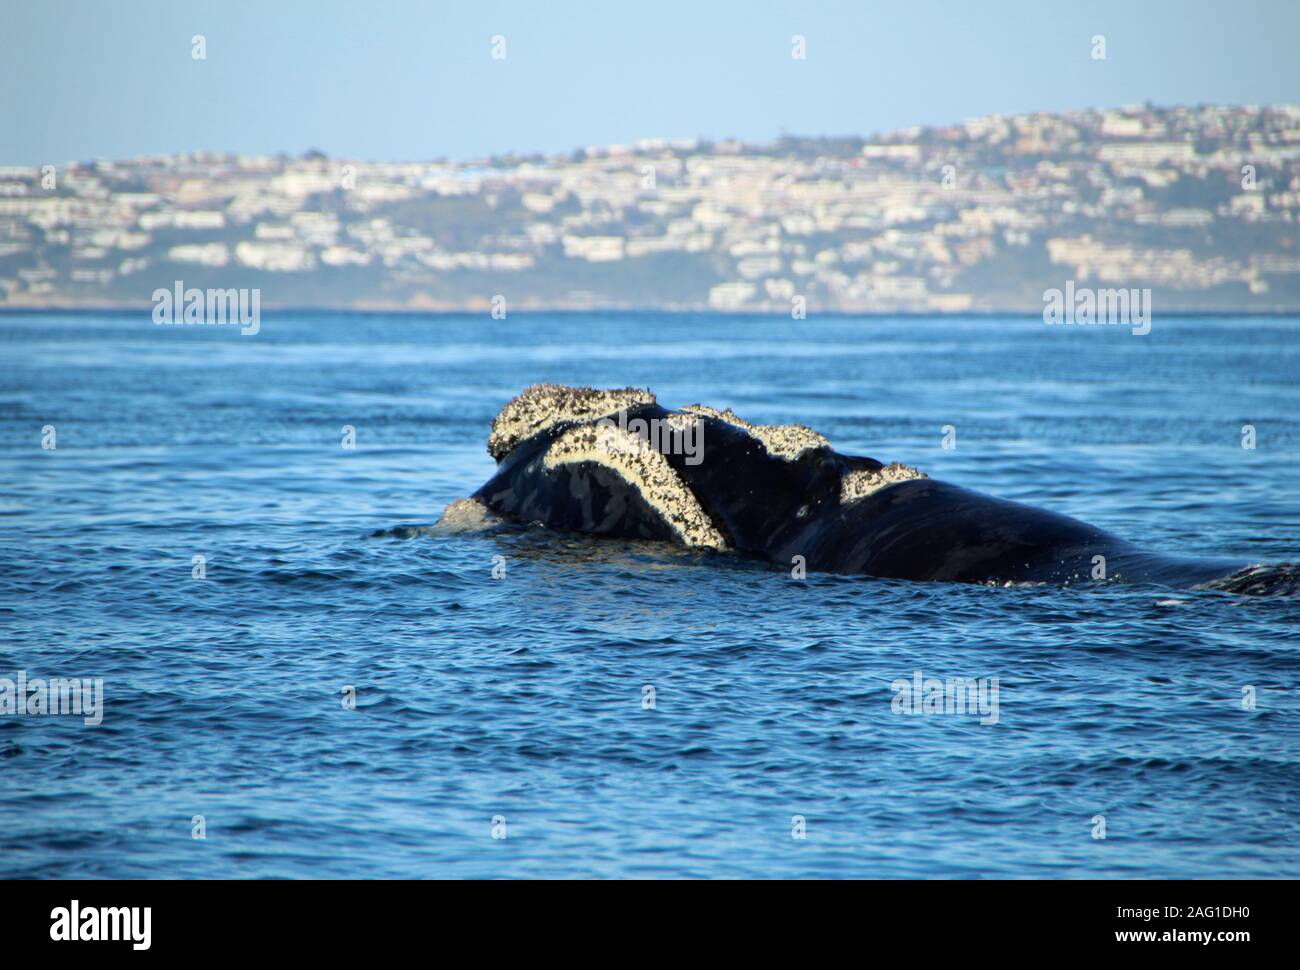 Baleen whale off the coast of South Africa hermanus Stock Photo